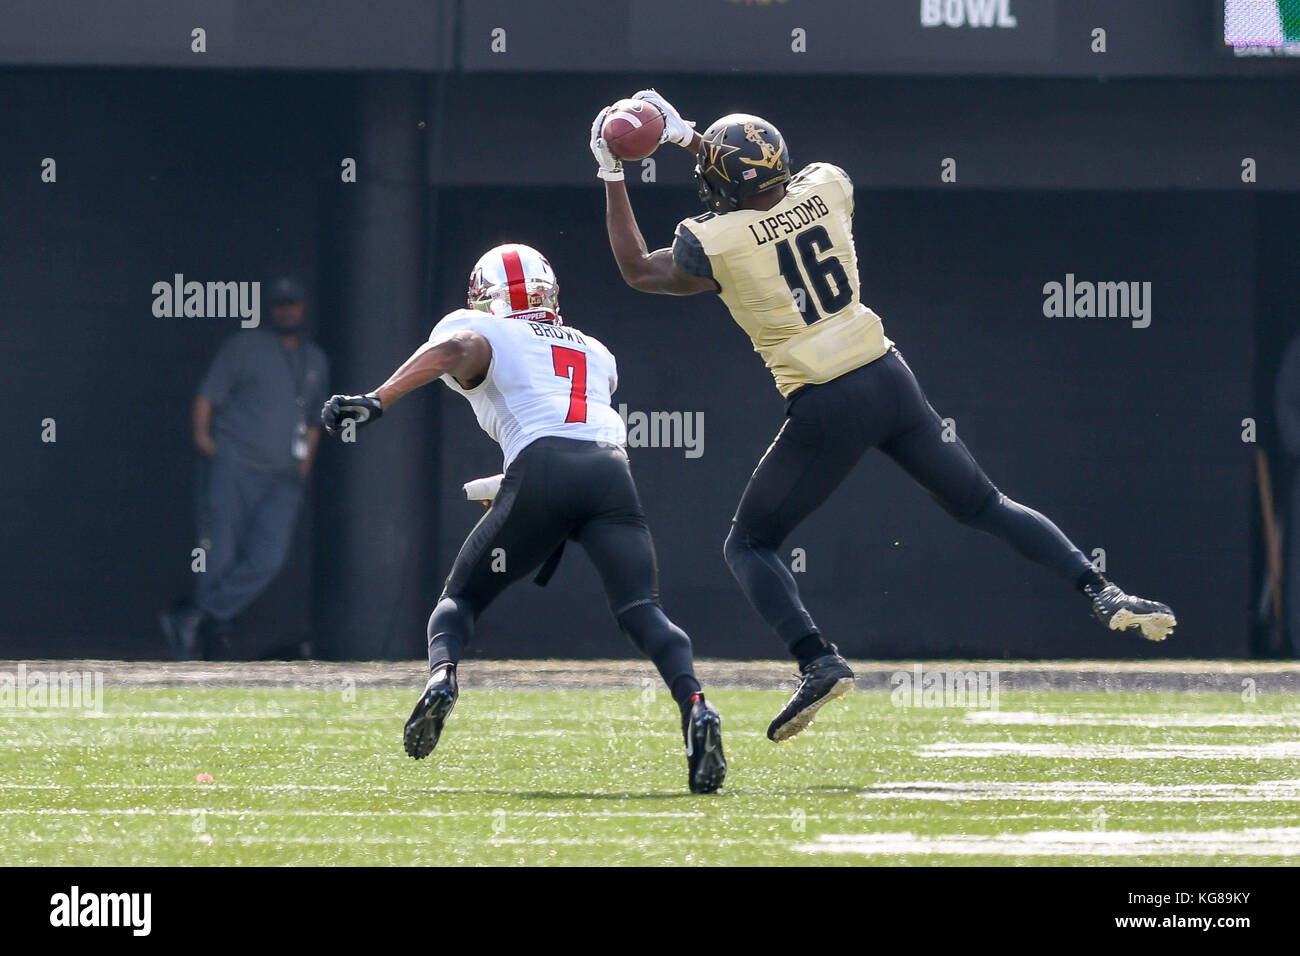 November 4, 2017: Vanderbilt Commodores wide receiver Kalija Lipscomb (16) makes a leaping catch during the game between the Western Kentucky Hilltoppers and the Vanderbilt Commodores at Vanderbilt Stadium in Nashville. TN. Thomas McEwen/CSM Stock Photo